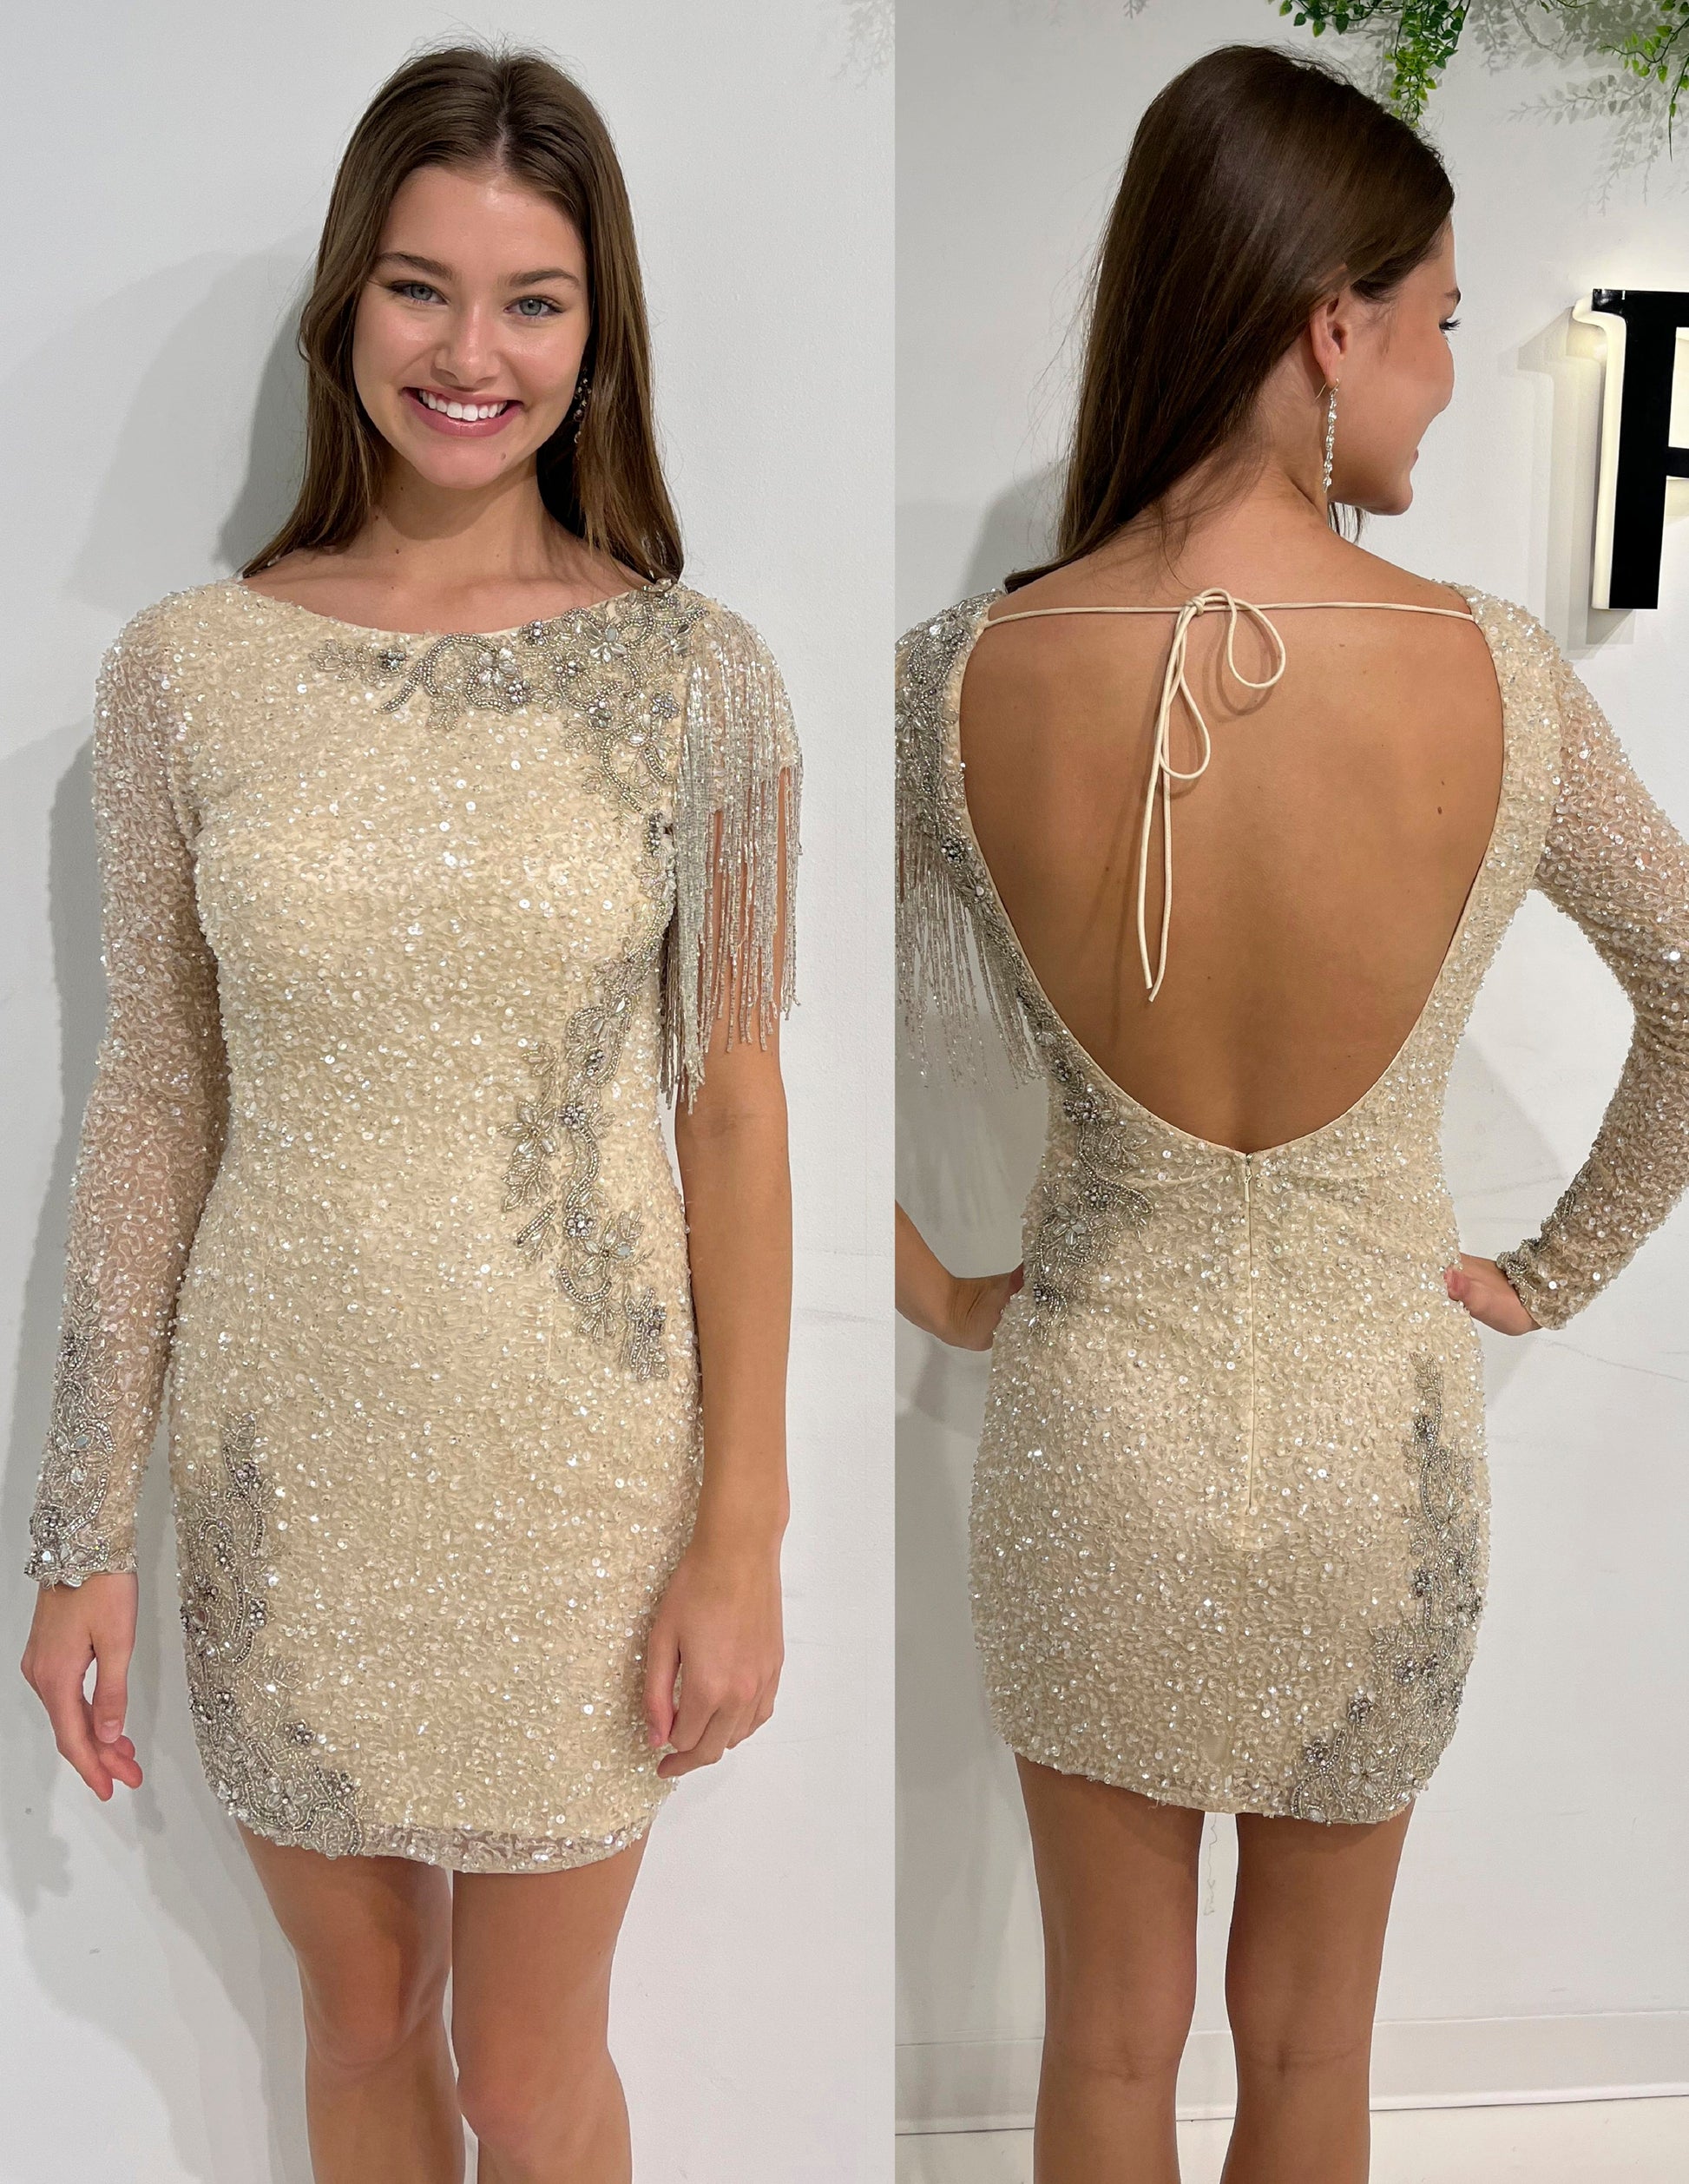 Primavera Couture 3842 Short 2022 Homecoming dress Fitted sequin beaded short cocktail dress  Available Color- Nude Silver  Available Size- 00